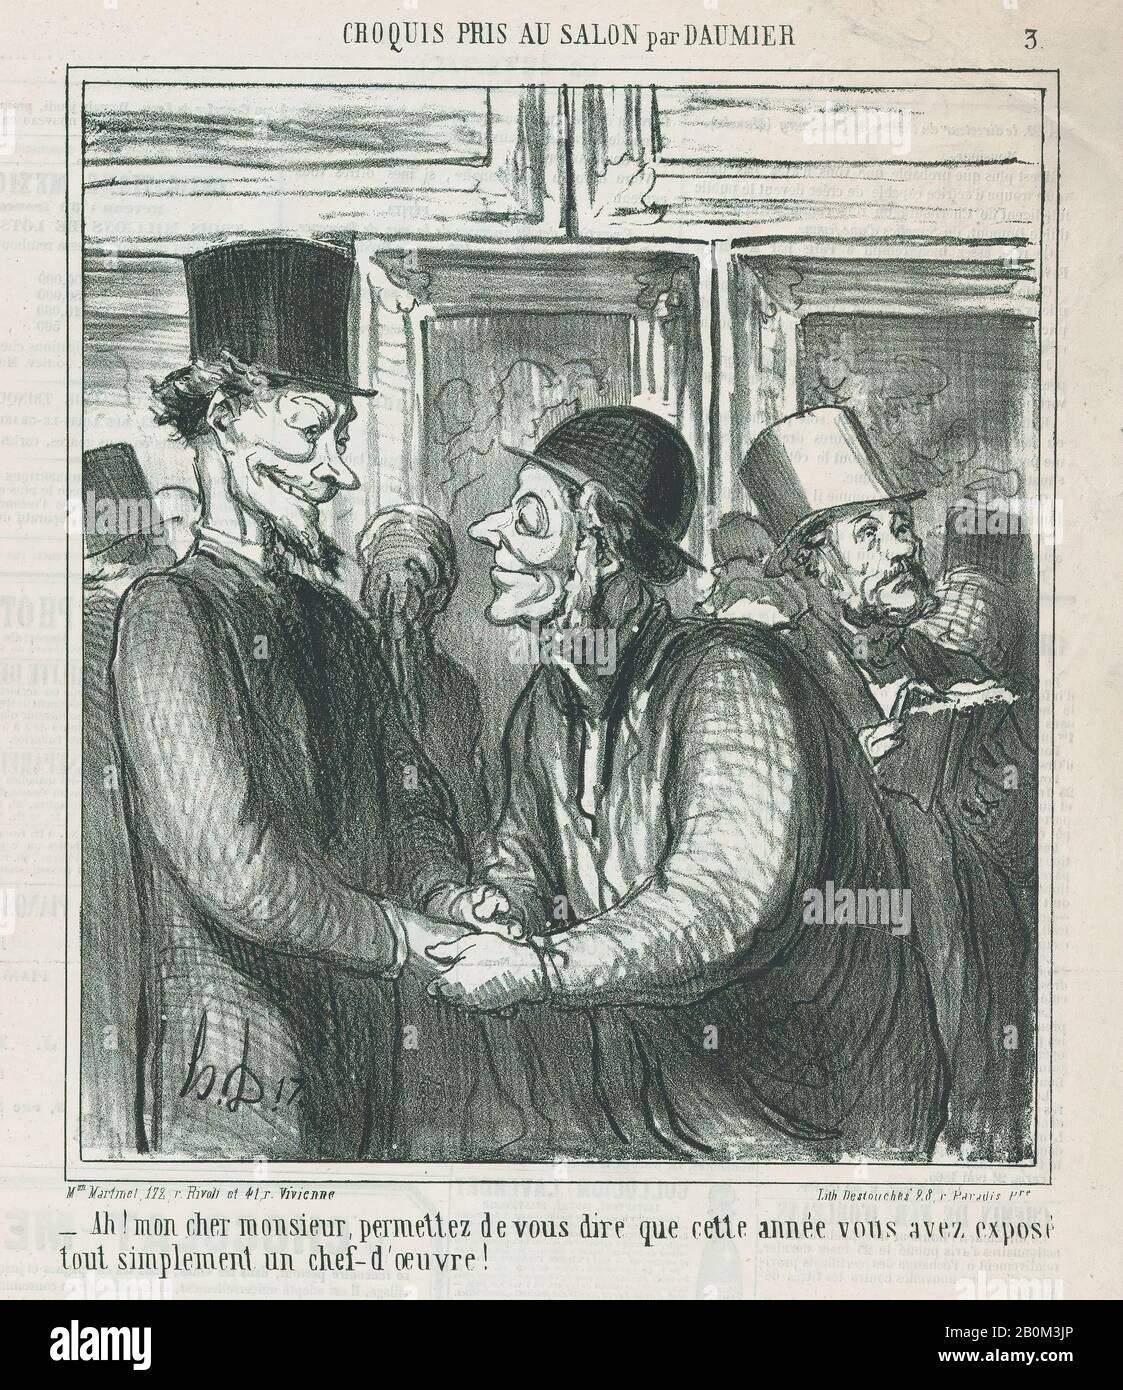 Honoré Daumier, Ah, my dear sir, allow me to tell you that this year you have quite simply exhibited a masterpiece, from 'Sketches from the Salon,' published in Le Charivari, May 31, 1865, 'Sketches from the Salon' (Croquis pris au Salon), Honoré Daumier (French, Marseilles 1808–1879 Valmondois), May 31, 1865, Lithograph on newsprint; second state of two (Delteil), Image: 9 3/16 × 8 3/16 in. (23.4 × 20.8 cm), Sheet: 11 13/16 × 11 7/16 in. (30 × 29.1 cm), Prints Stock Photo